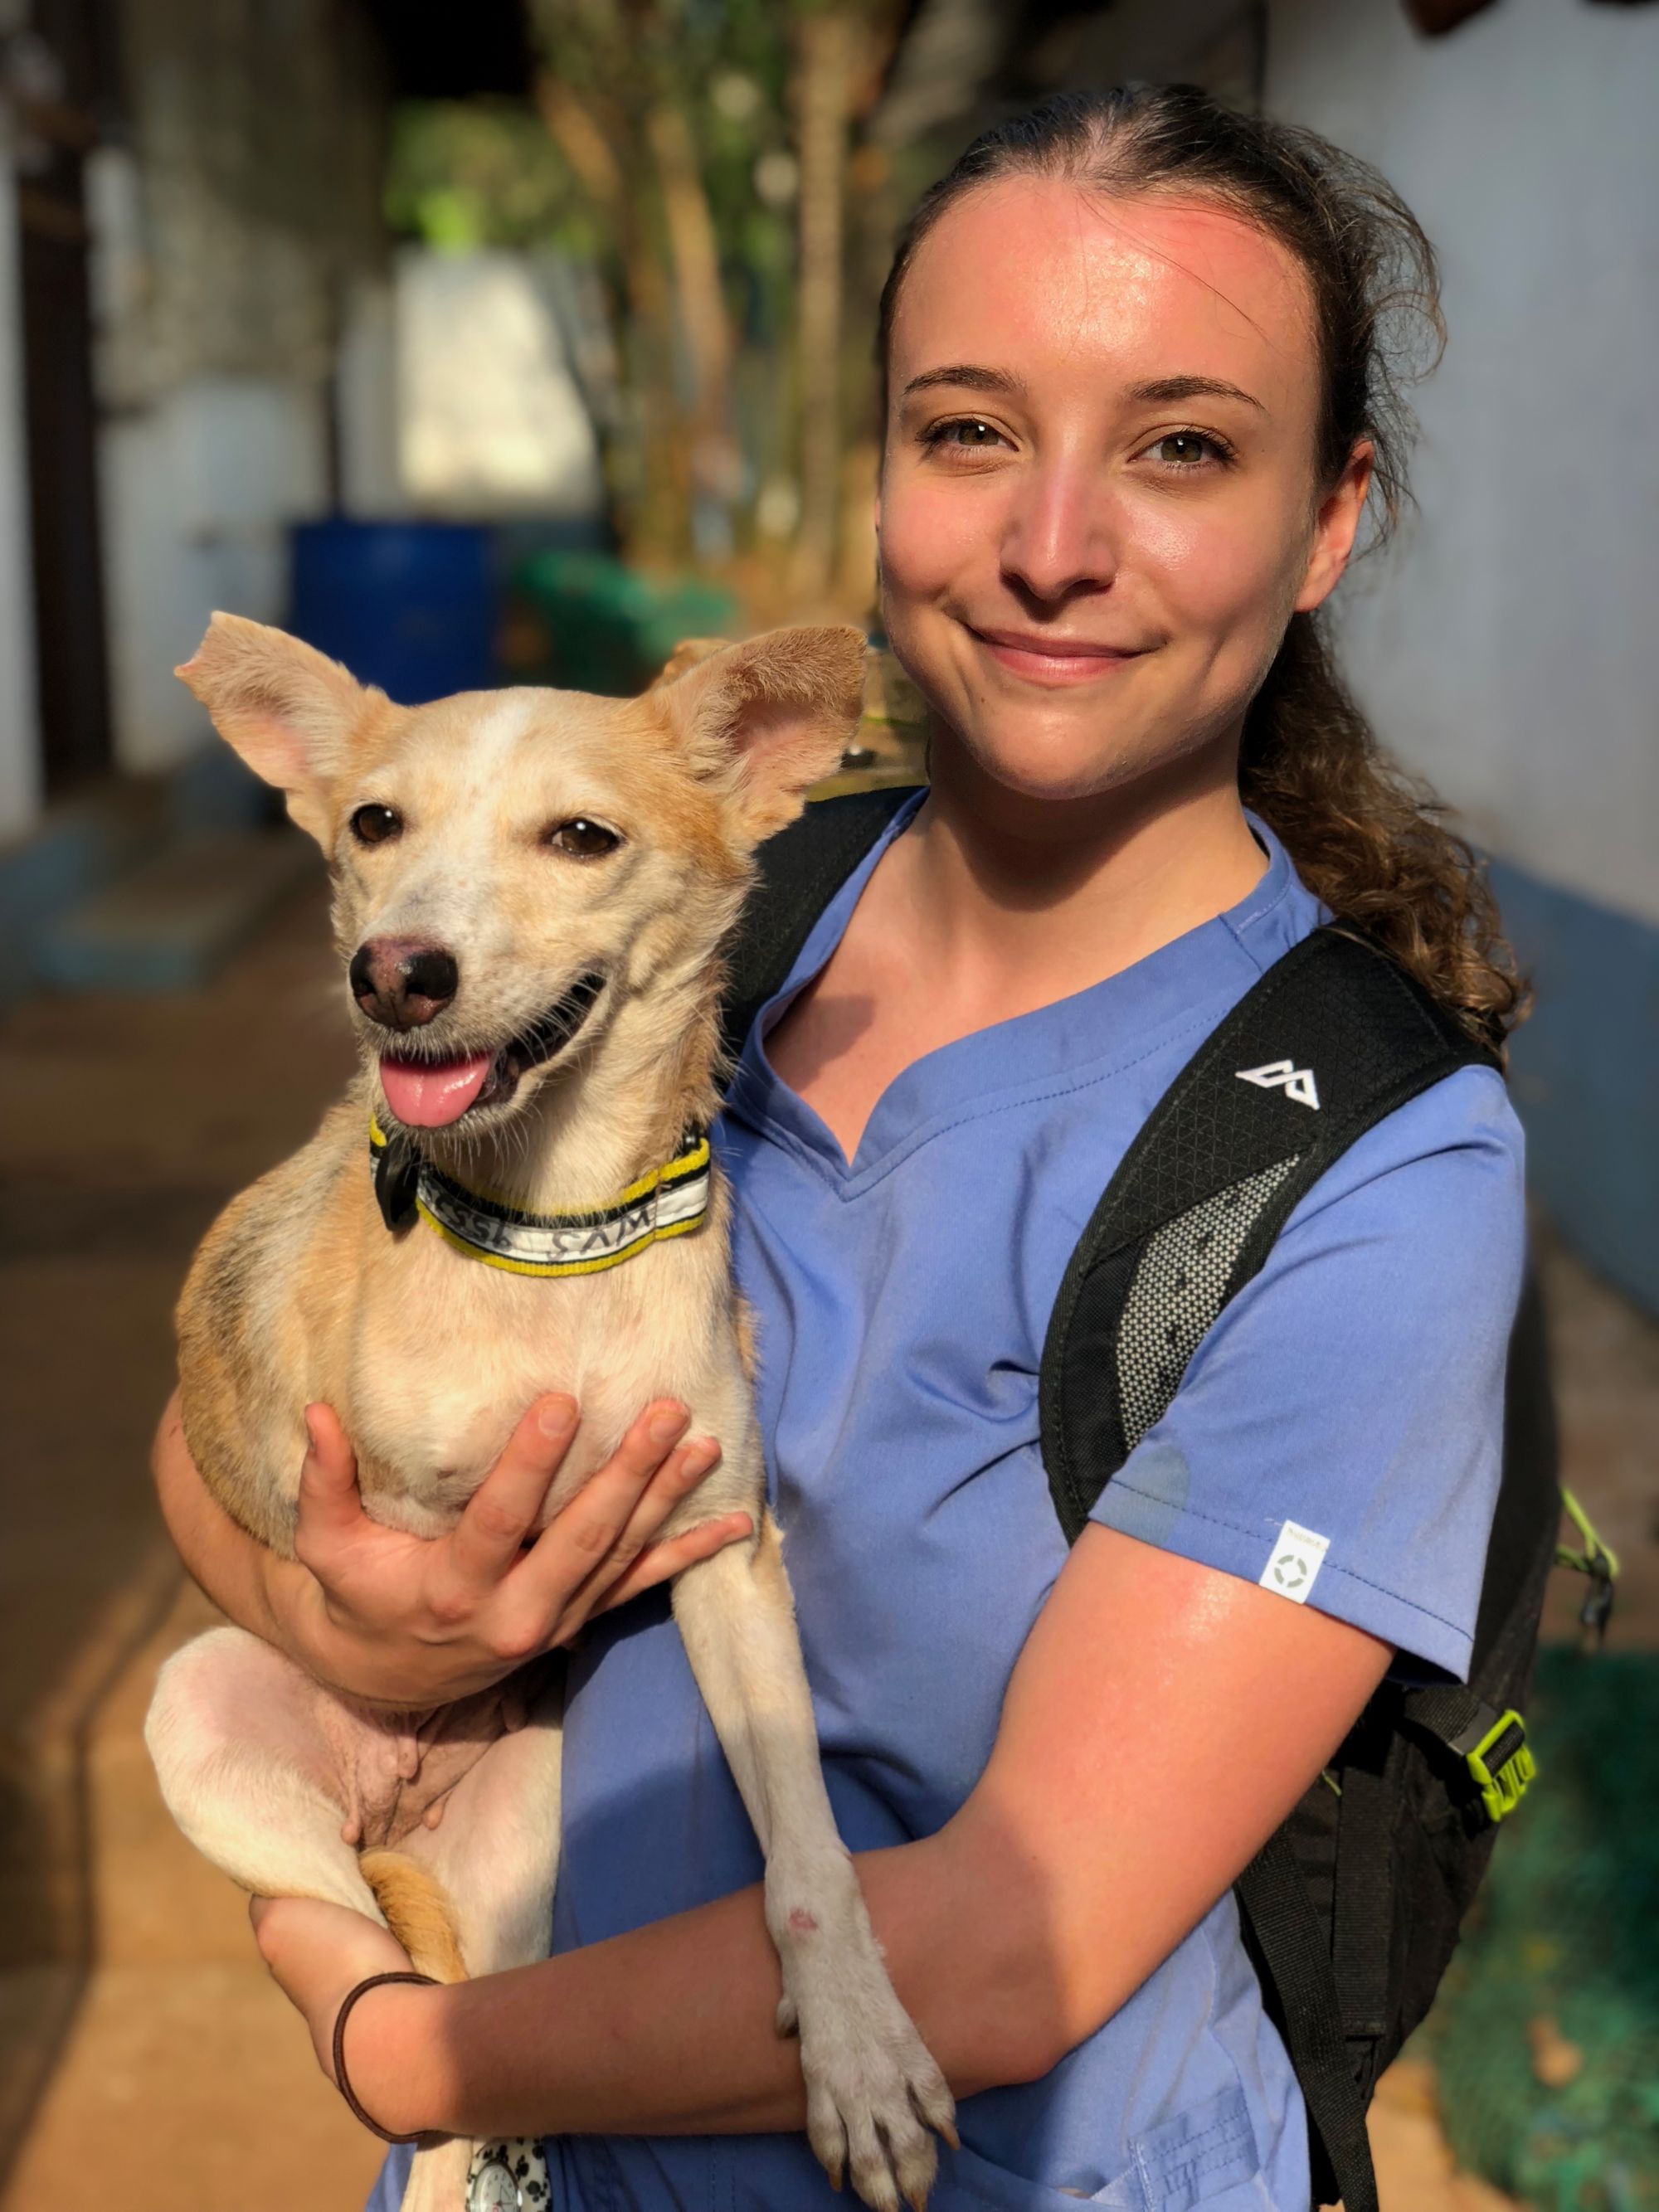 Train with us in India: A veterinary student from RVC's experience